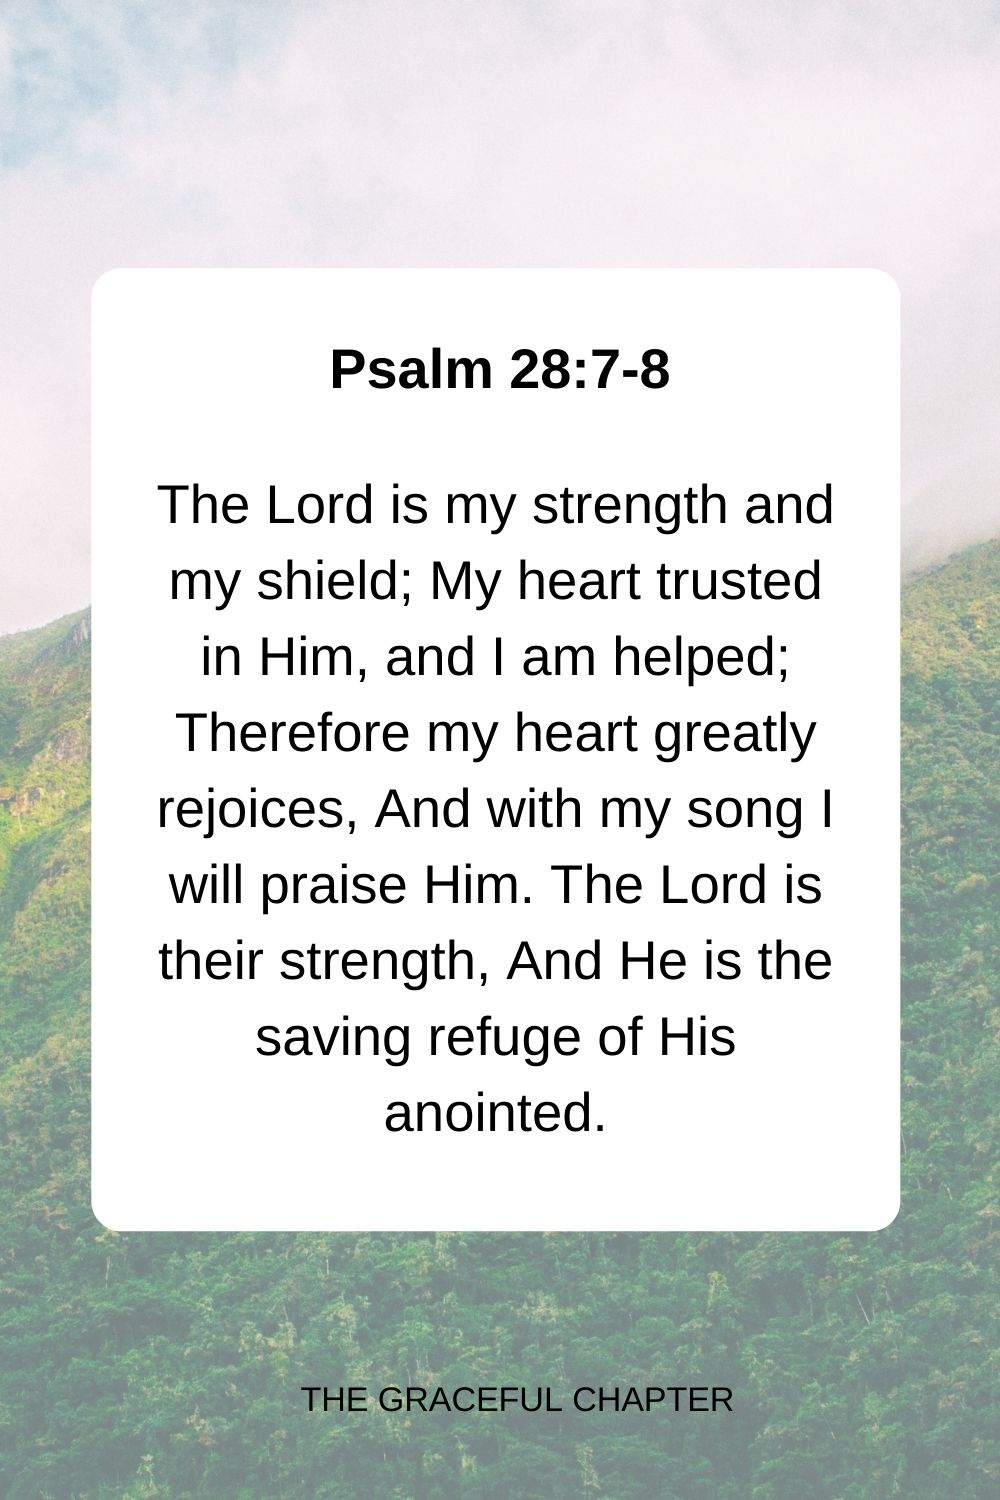 The Lord is my strength and my shield; My heart trusted in Him, and I am helped; Therefore my heart greatly rejoices, And with my song I will praise Him. The Lord is their strength, And He is the saving refuge of His anointed. Psalm 28:7-8